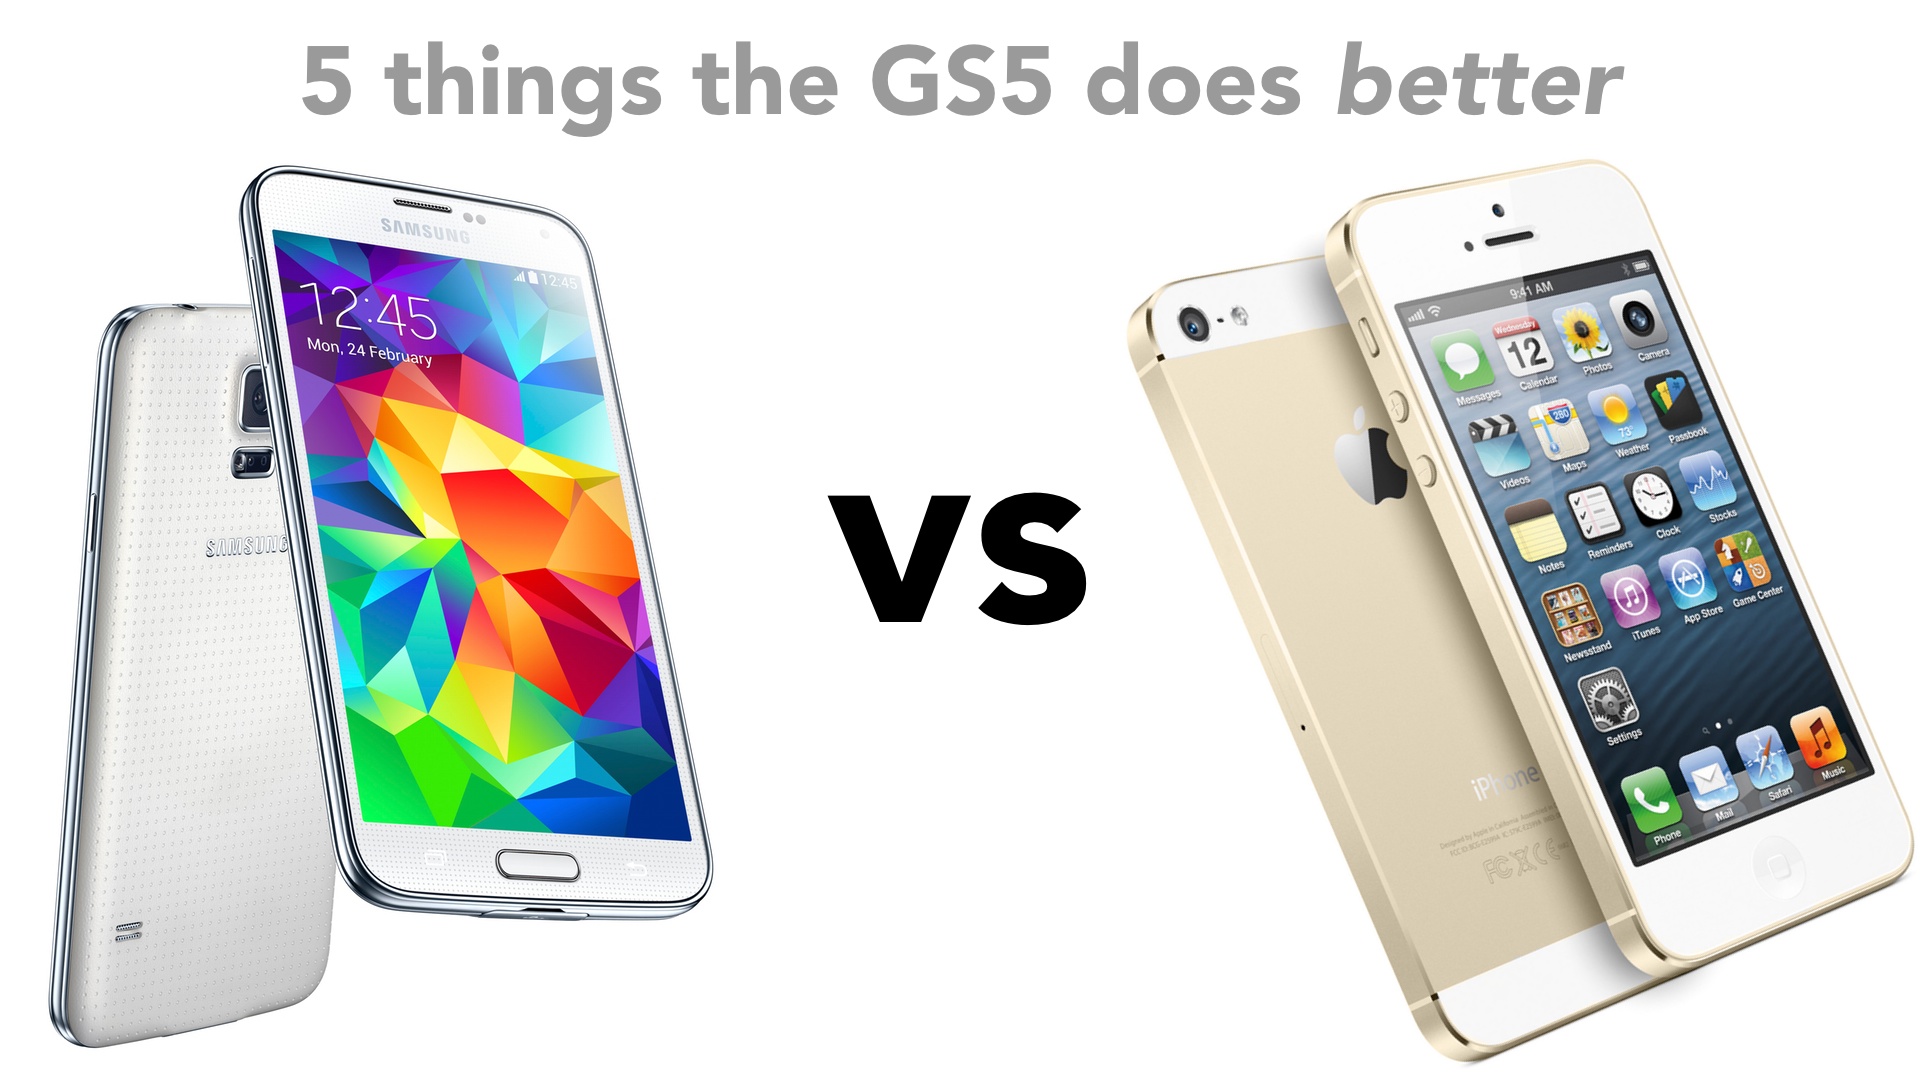 5 things the GS5 does better